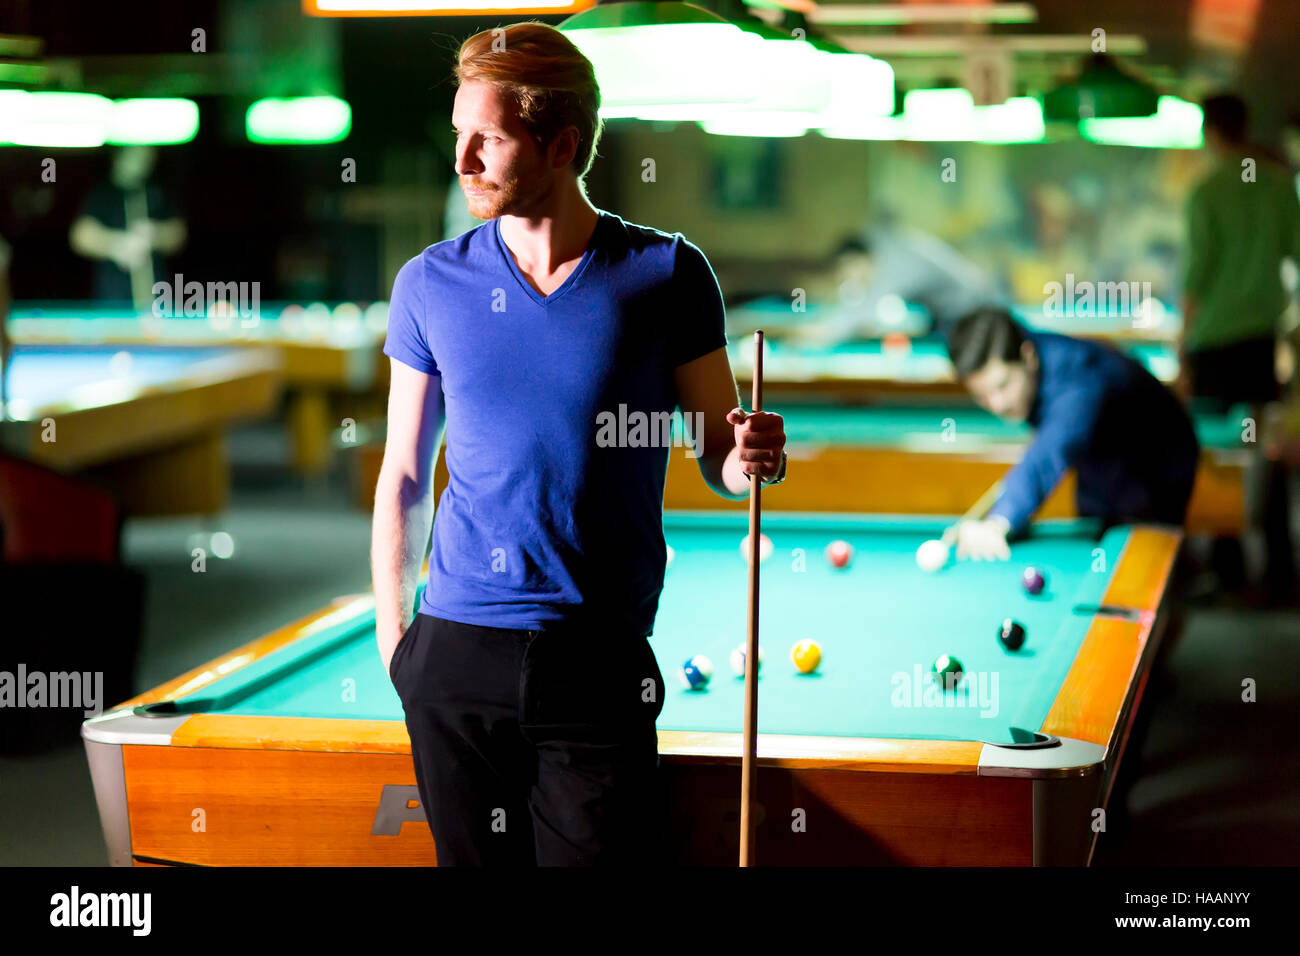 Portrait of a young man playing snooker Stock Photo